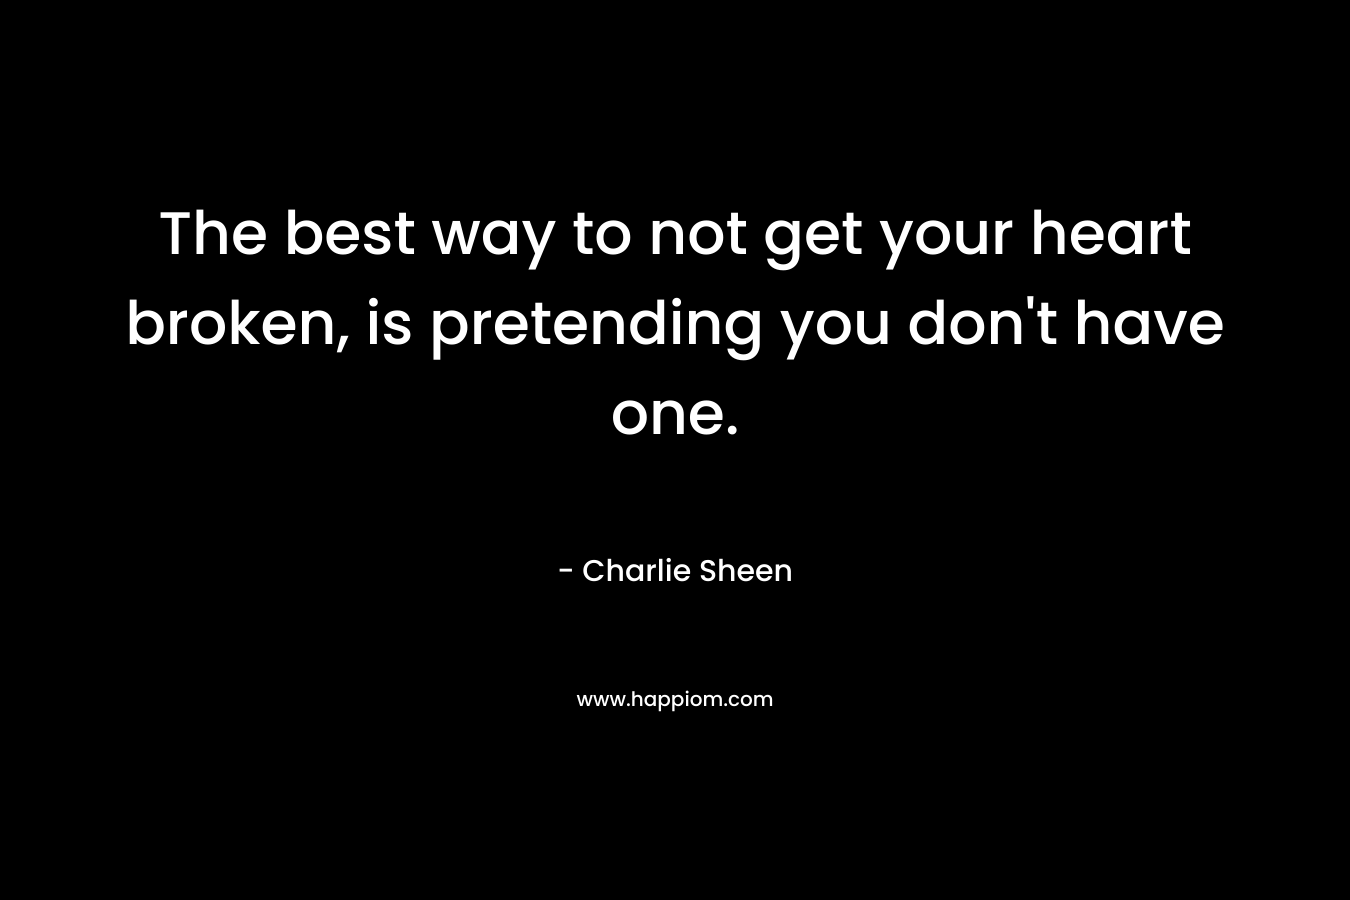 The best way to not get your heart broken, is pretending you don't have one.